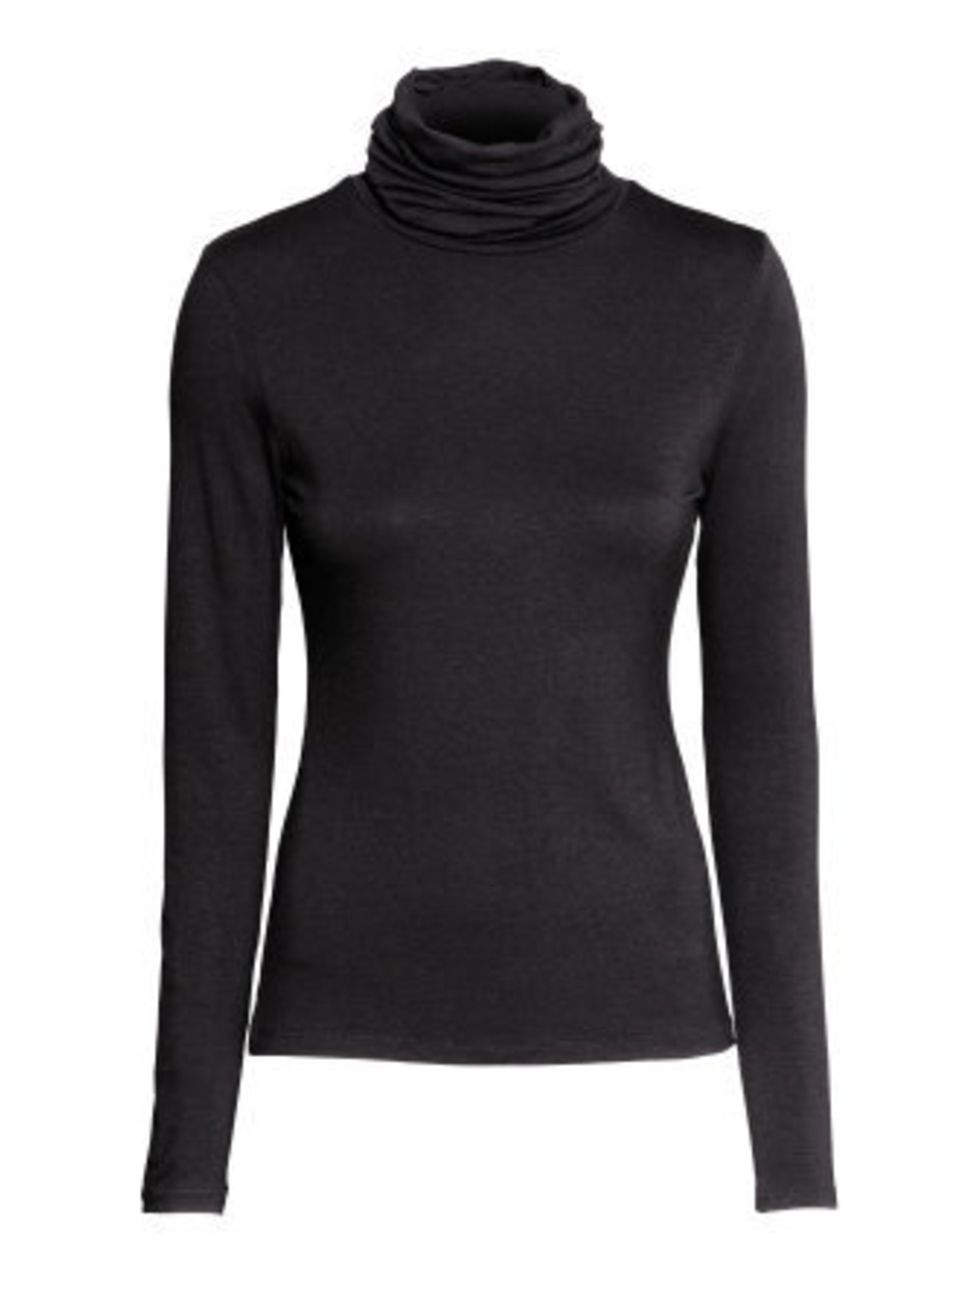 <p><a href="http://www.hm.com/gb/product/47032?article=47032-A&fromSearch=polo%20neck&cm_vc=SEARCH">H&M</a> polo neck, £7.99.</p>